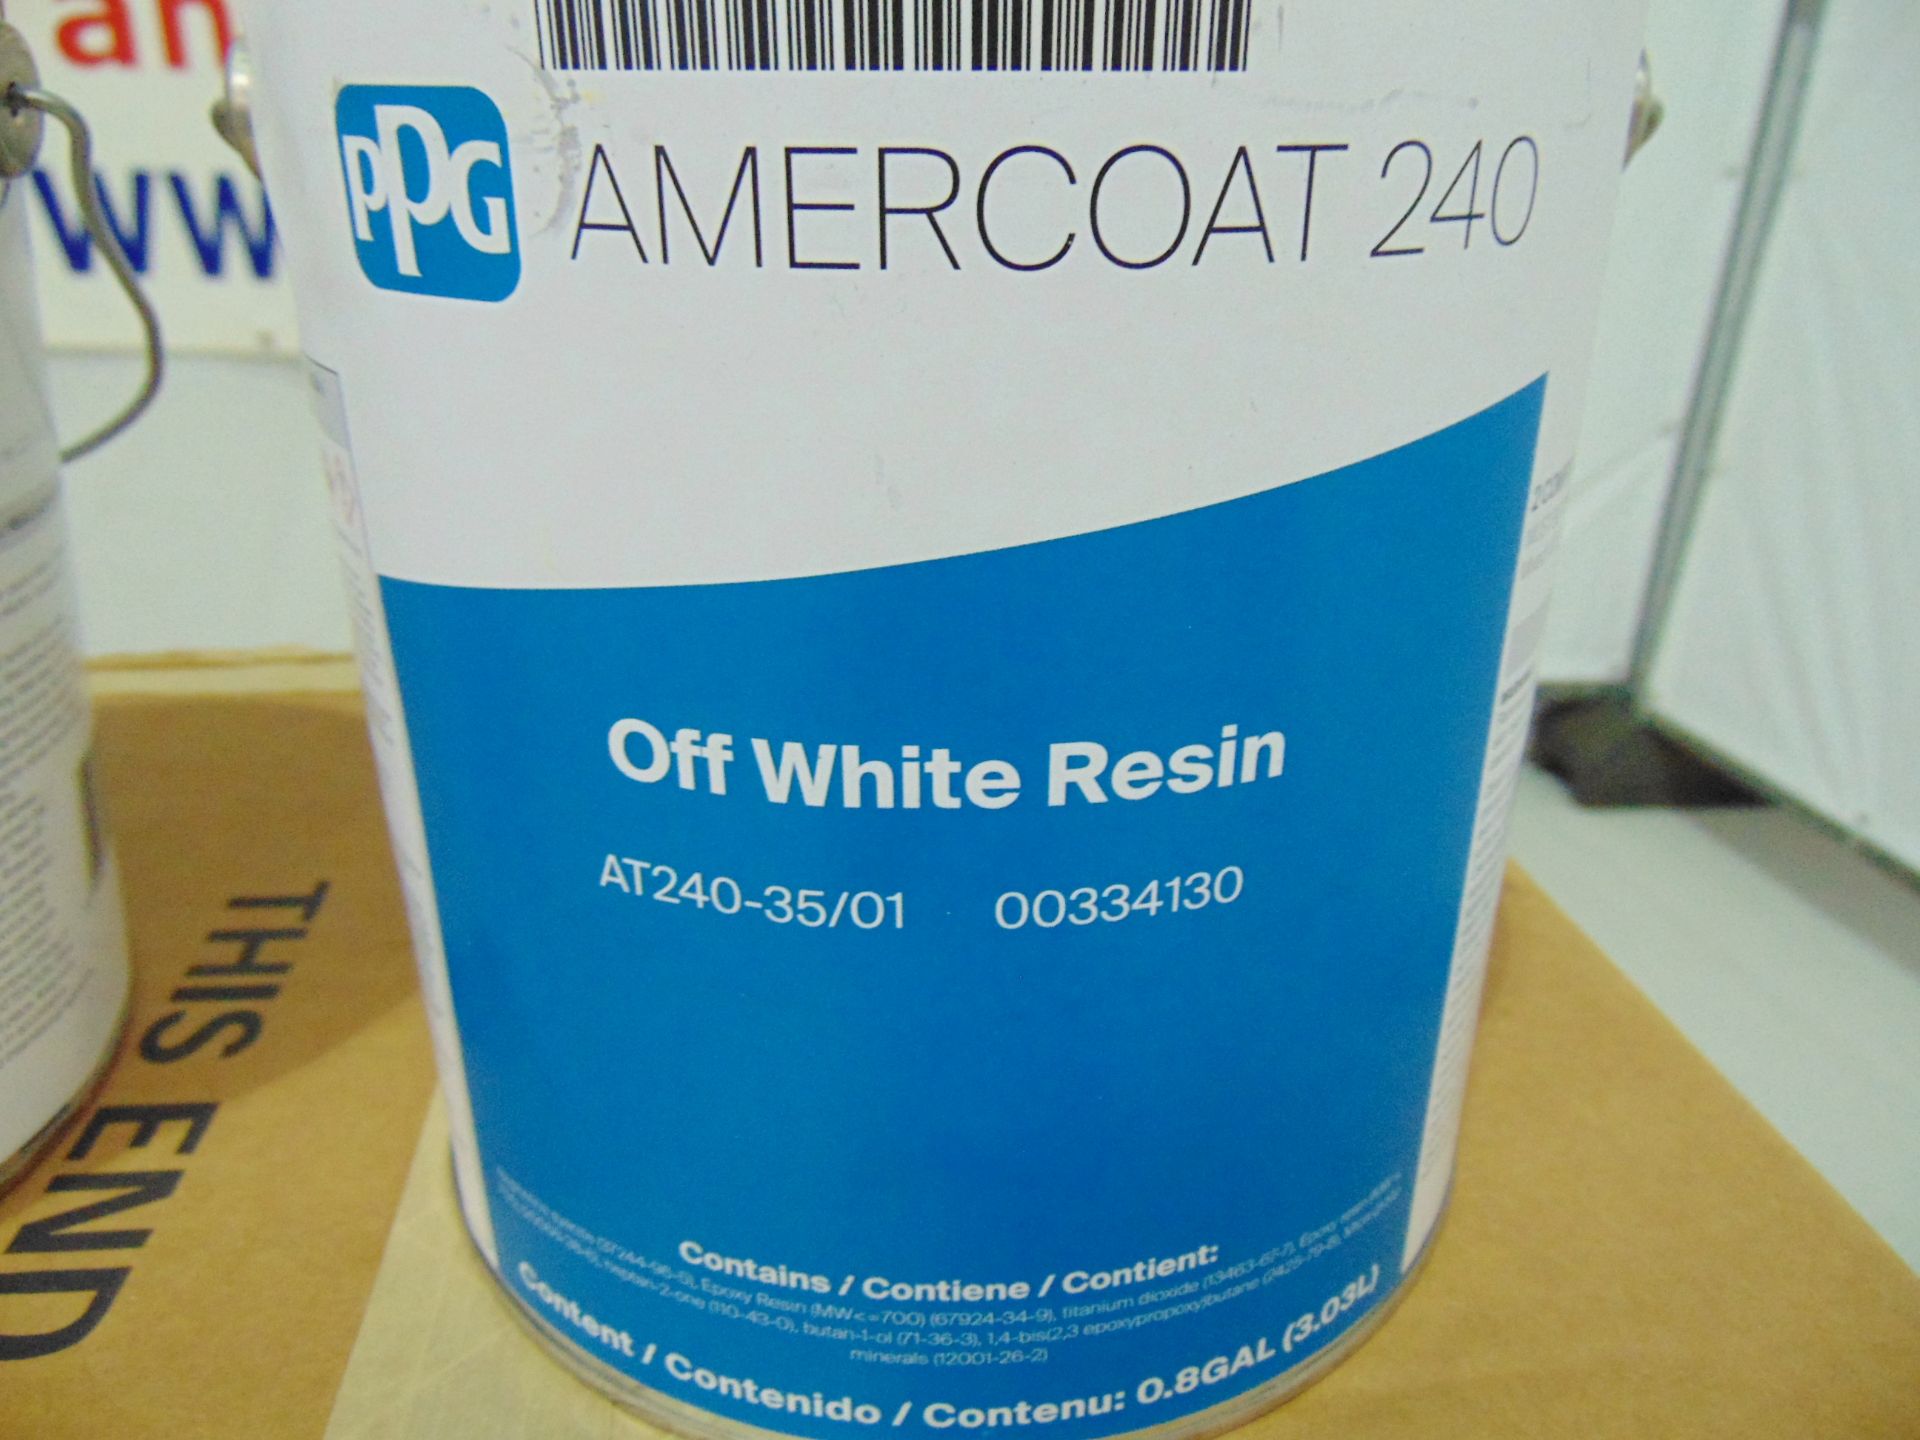 40 x Unissued Cans of Amercoat 240 Off White Resin - Image 3 of 7